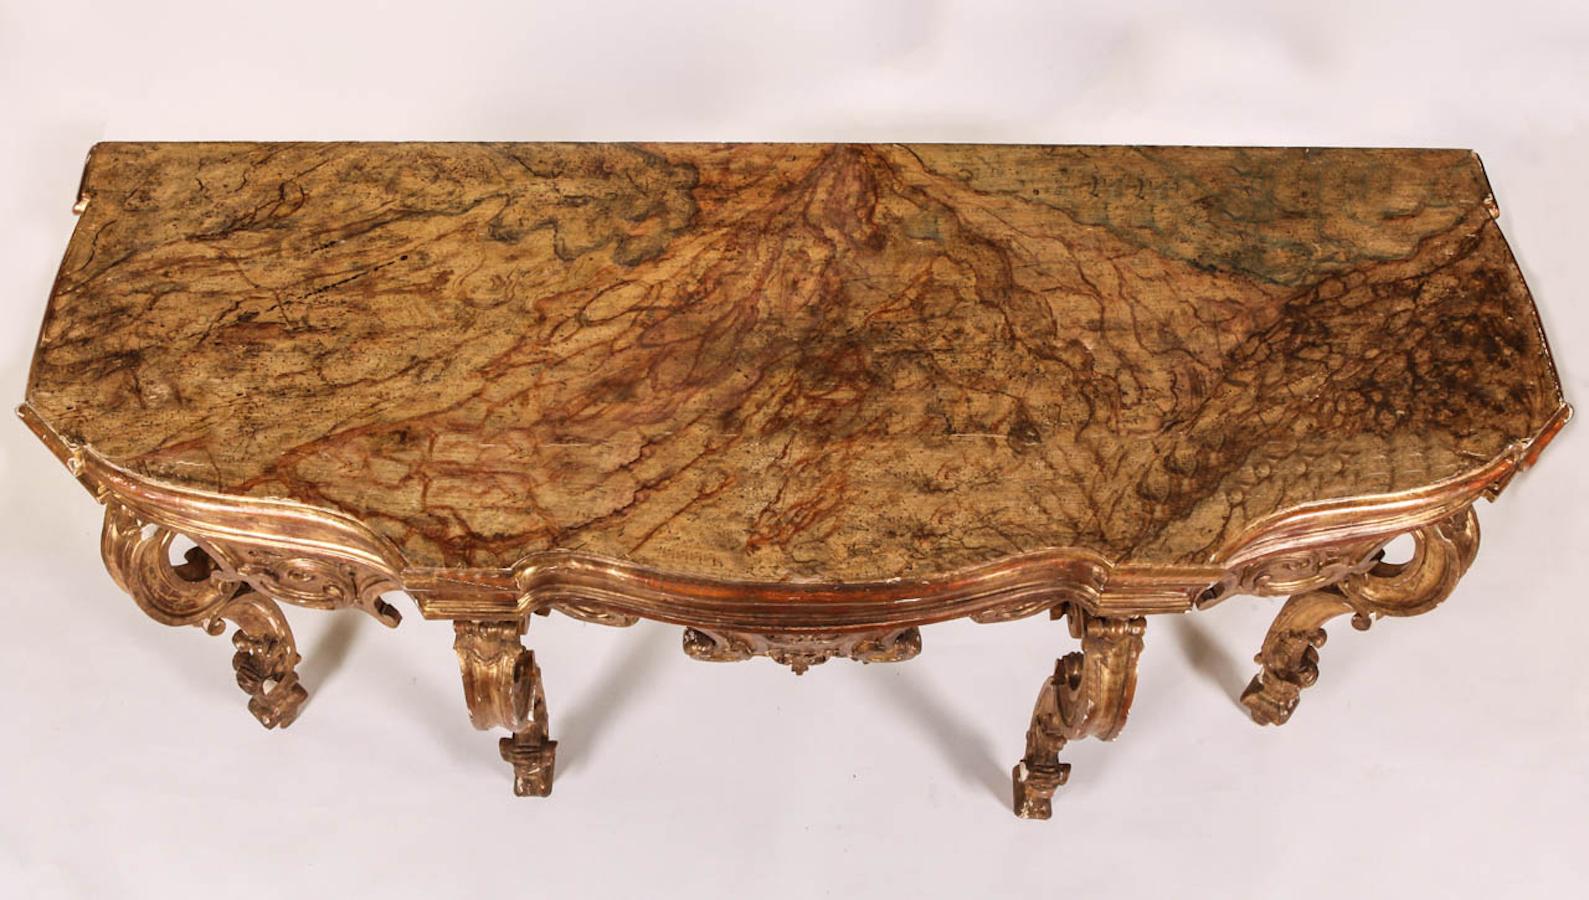 Elegant Nord Italian 18th century carved and giltwood console table with a painted faux marble top.
The table with original gilding we be fully restored before delivery.
Provenience: Leo Veneziani Collection.
Size: cm 175 x 65 x 93.